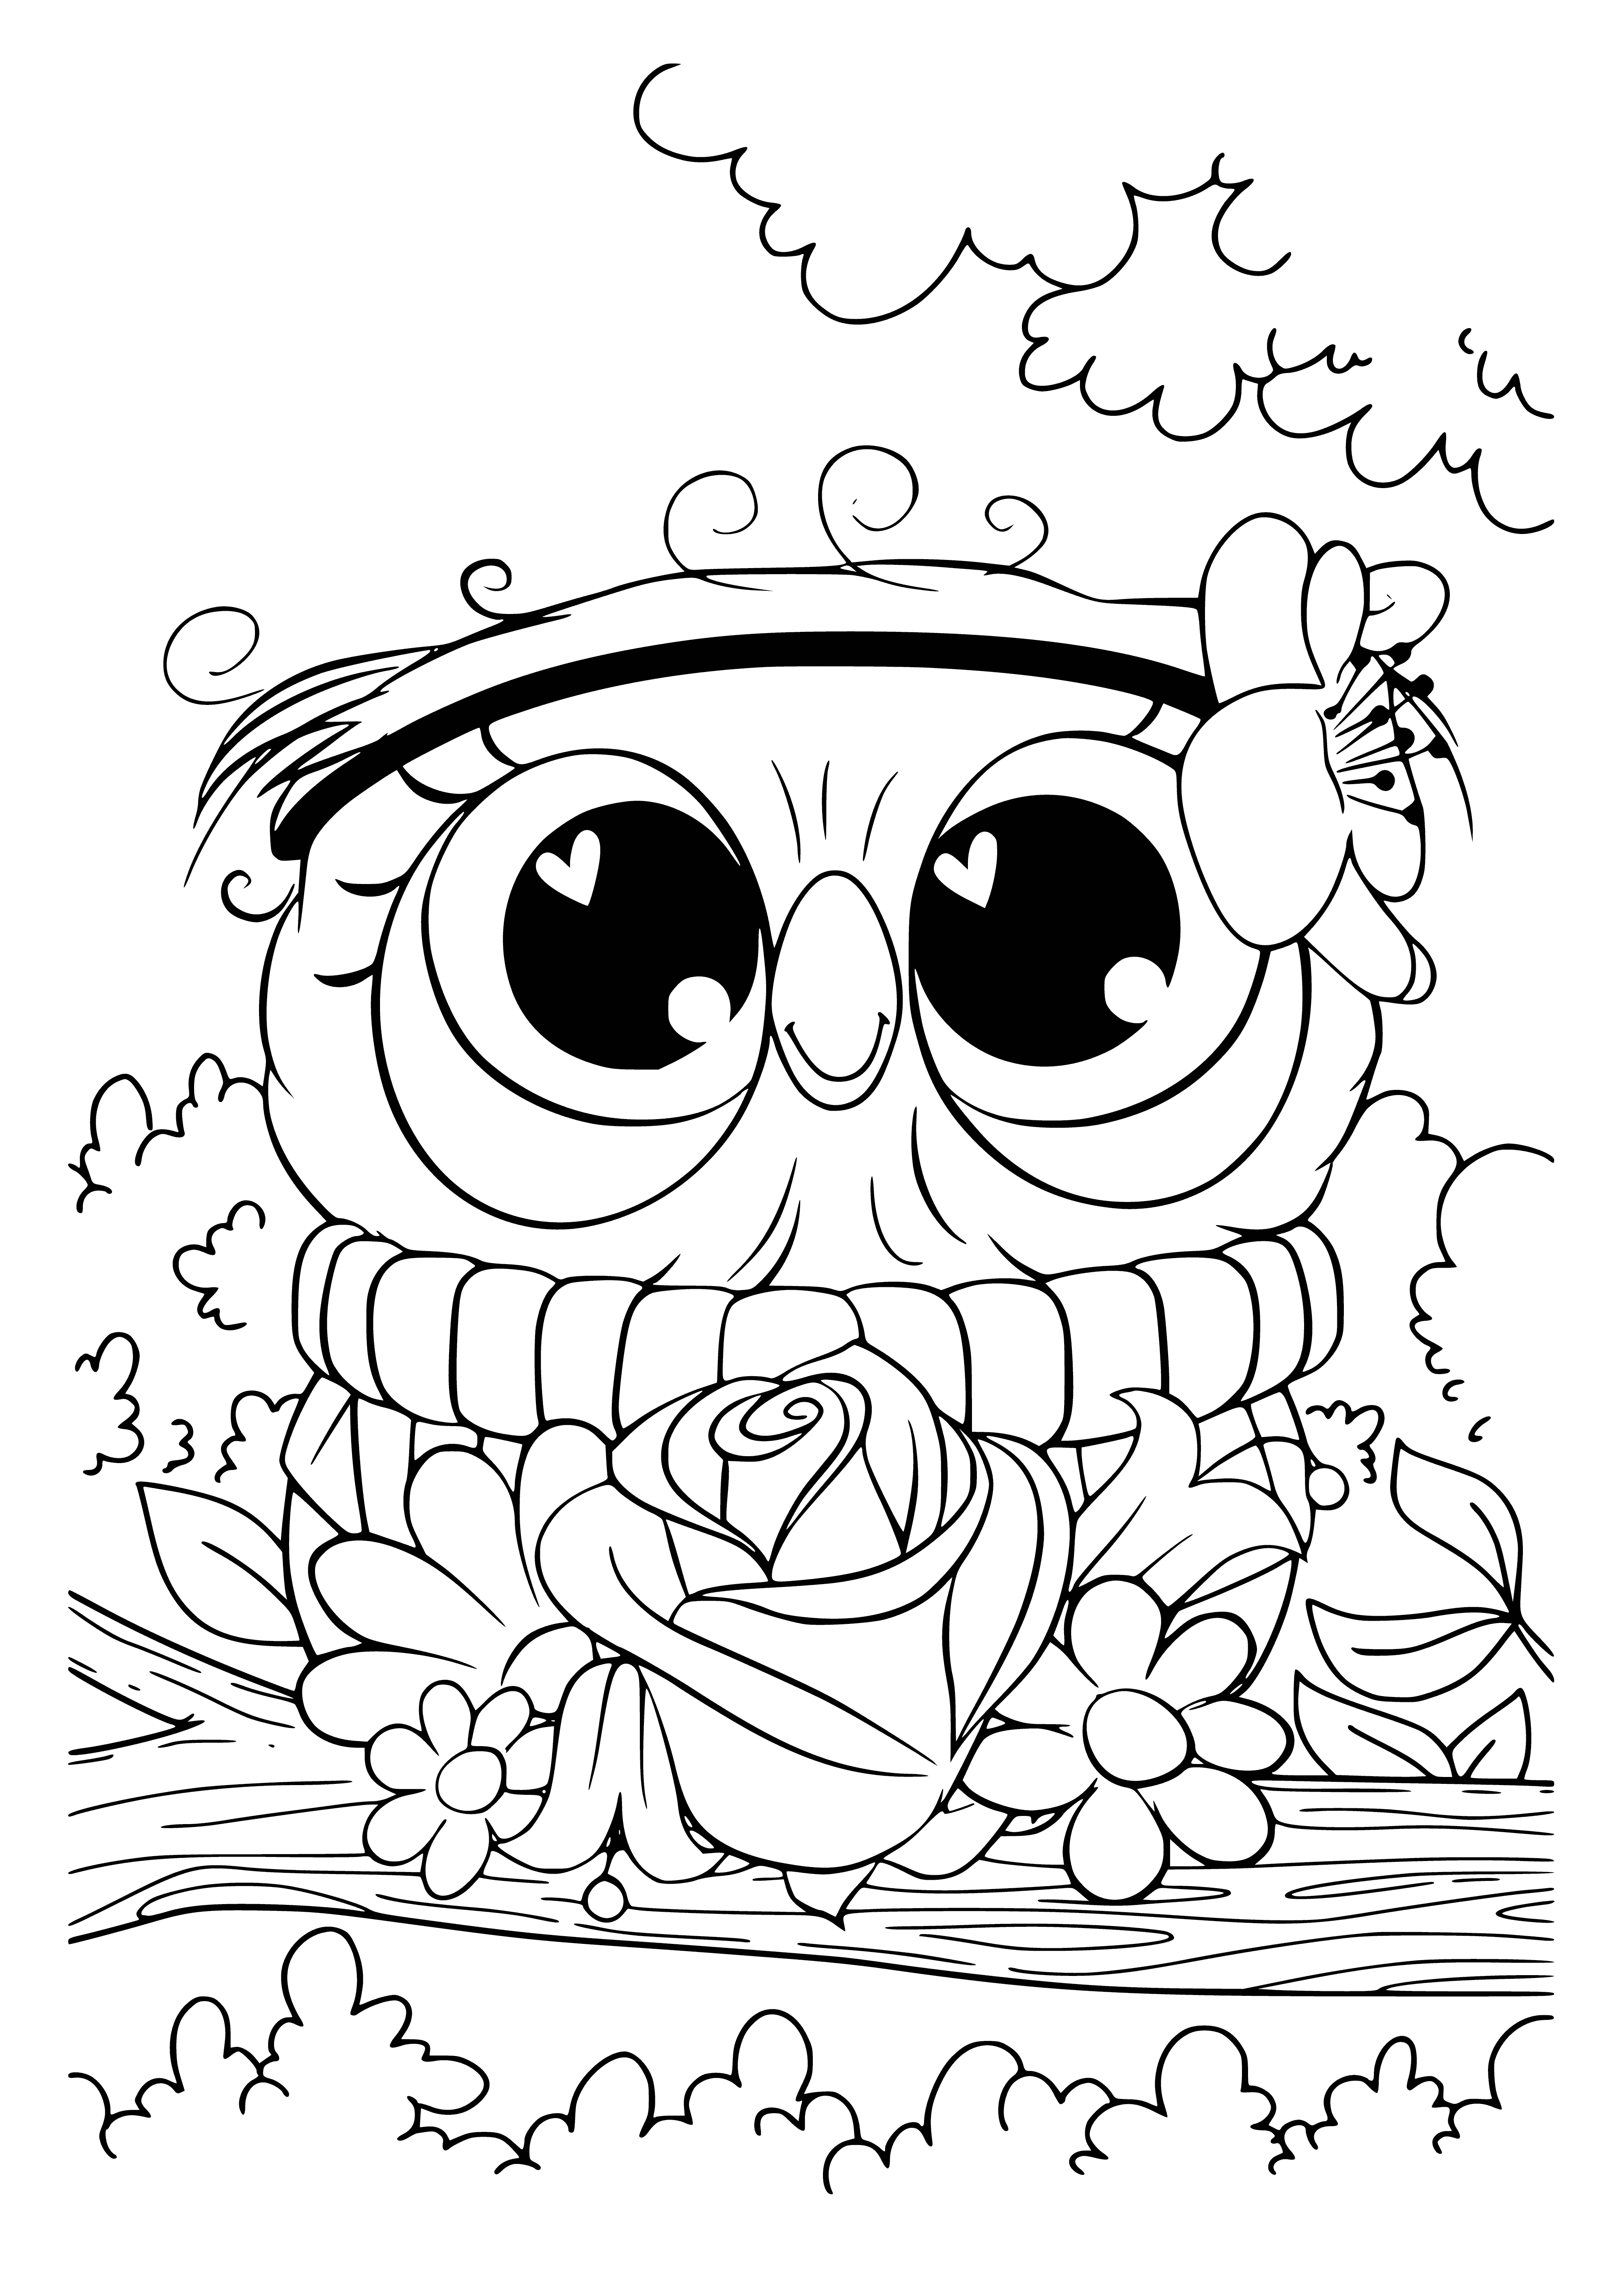 Smart owl coloring page